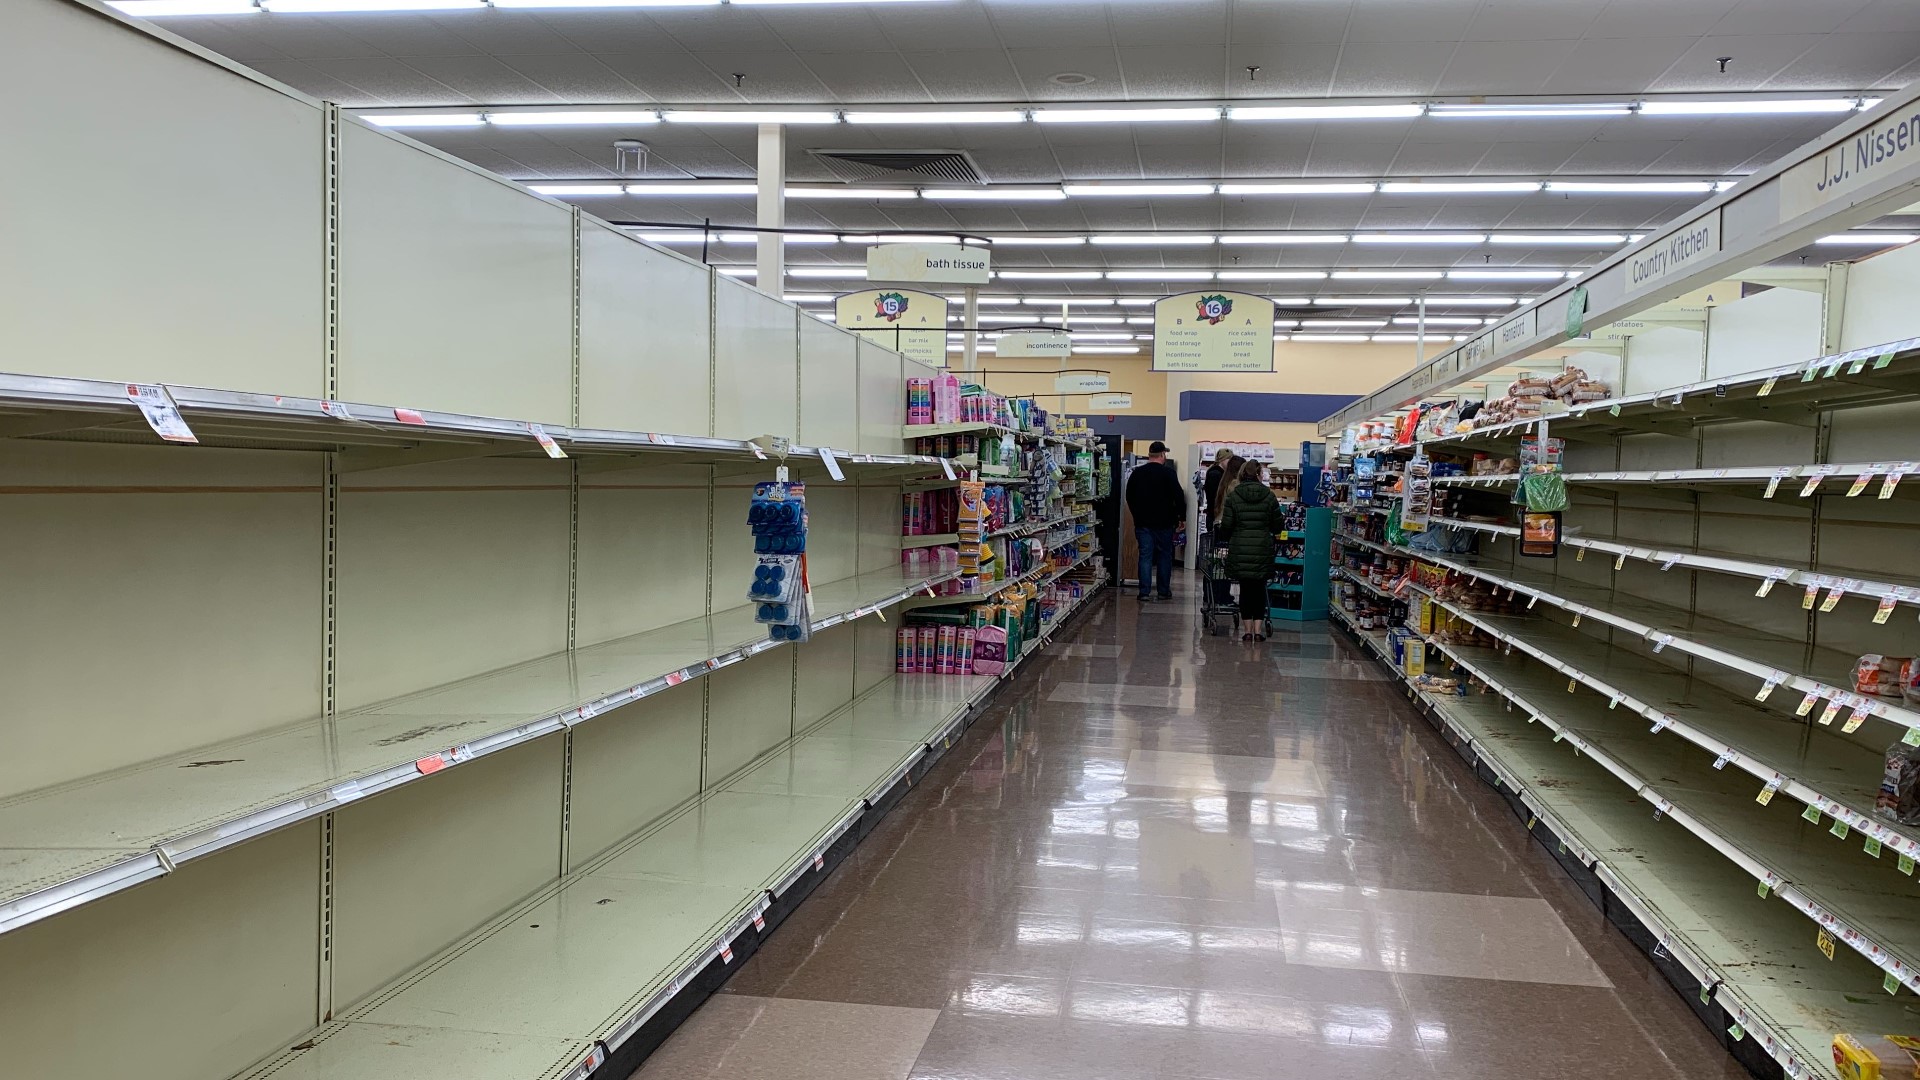 Supermarkets and local stores in Maine are having a hard time keeping up with the demand for supplies like toilet paper during the coronavirus scare.